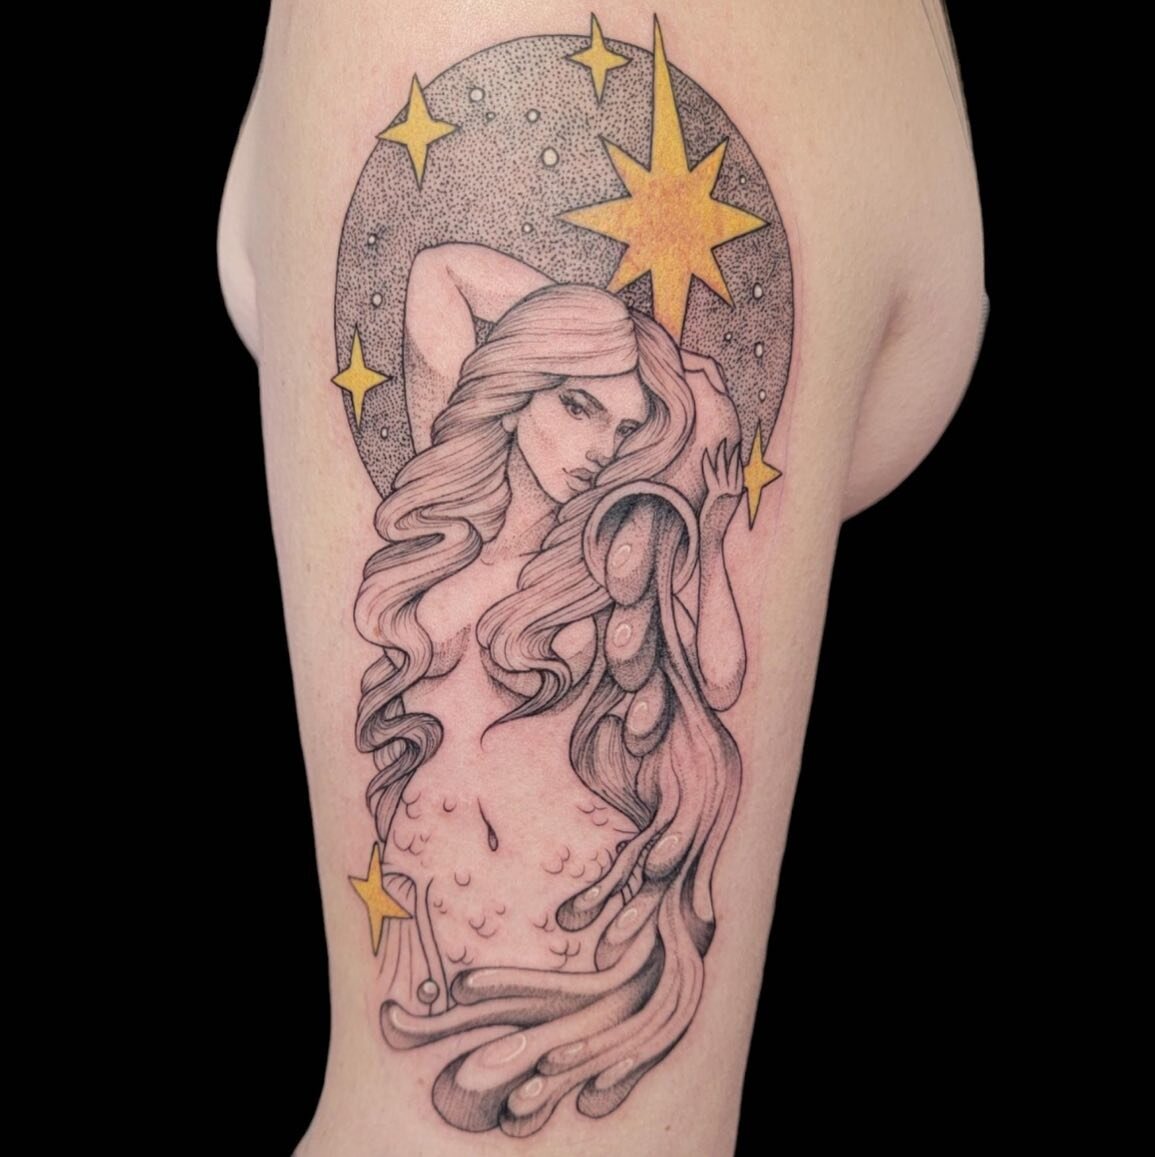 Here&rsquo;s a gorgeous Aquarius/Star tarot card inspired tattoo from @suannetattoos ! 😍✨🌟✨ #astrologytattoo #tarottattoo #aquarius #aquariustattoo #finelinetattoo #astrology #tarot